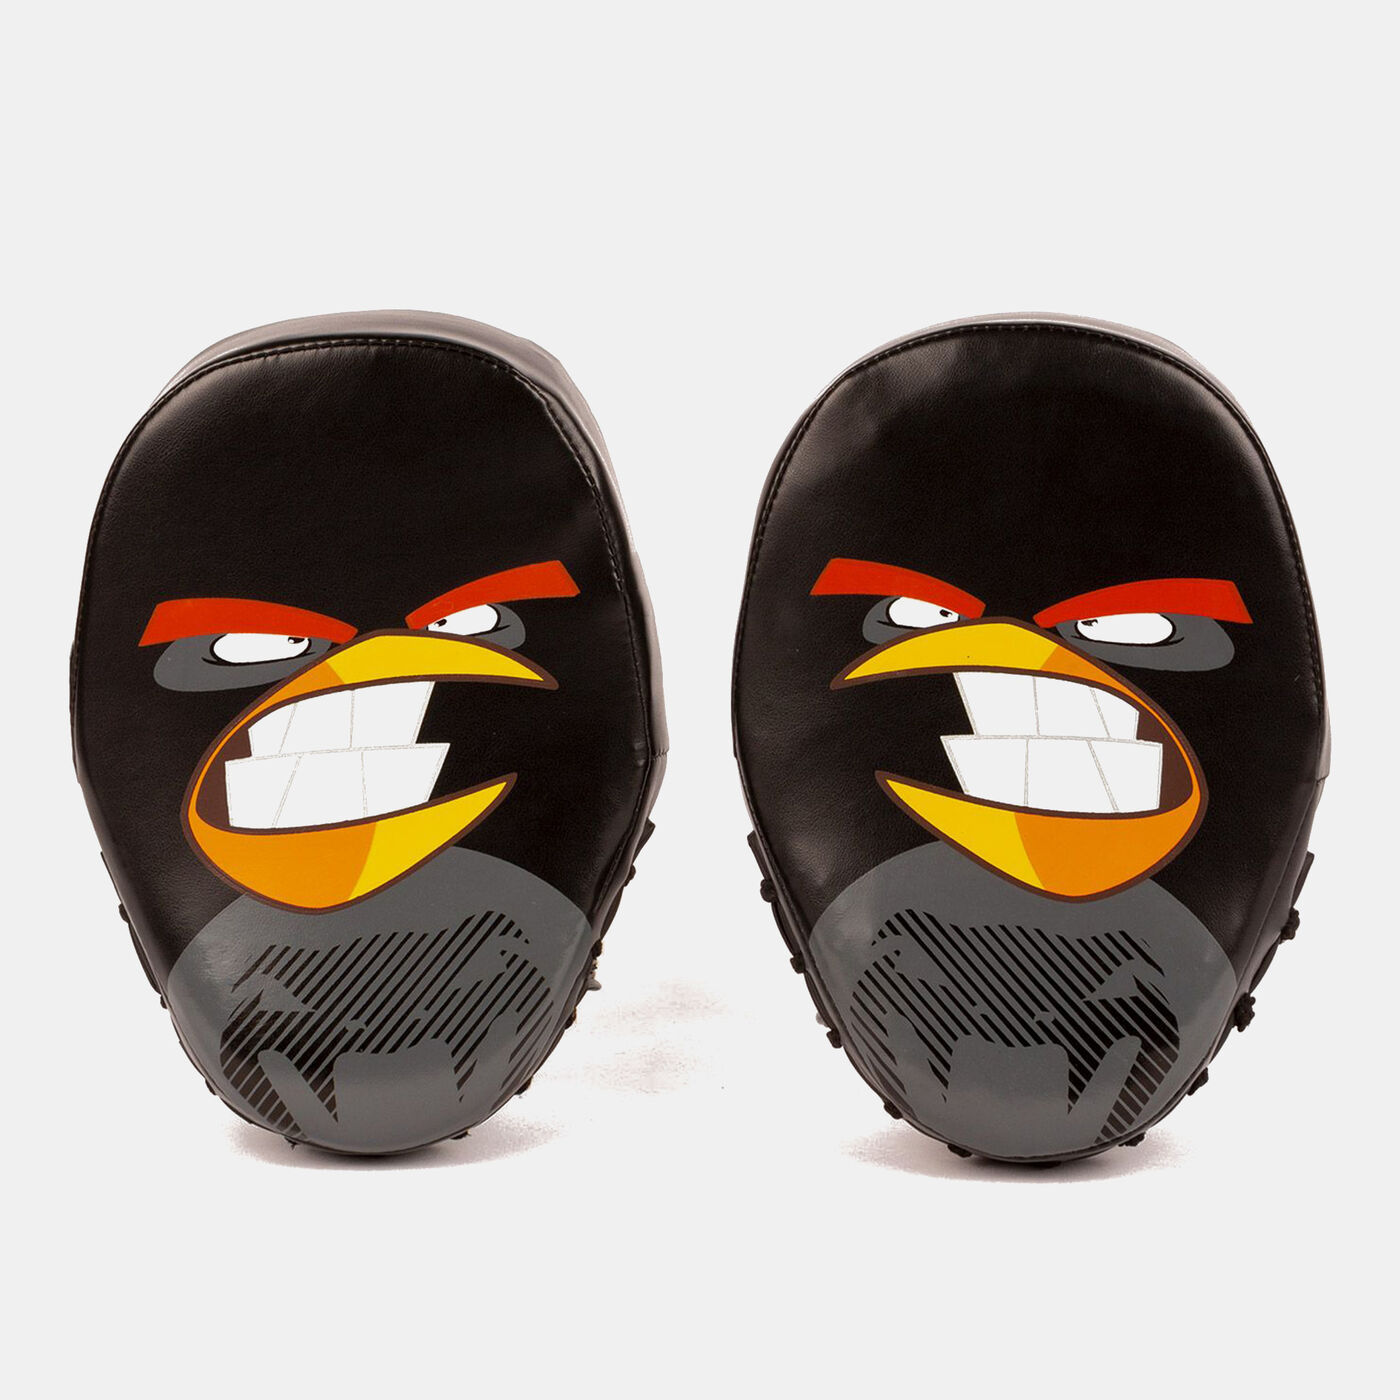 Kids' x Angry Birds Focus Mitts